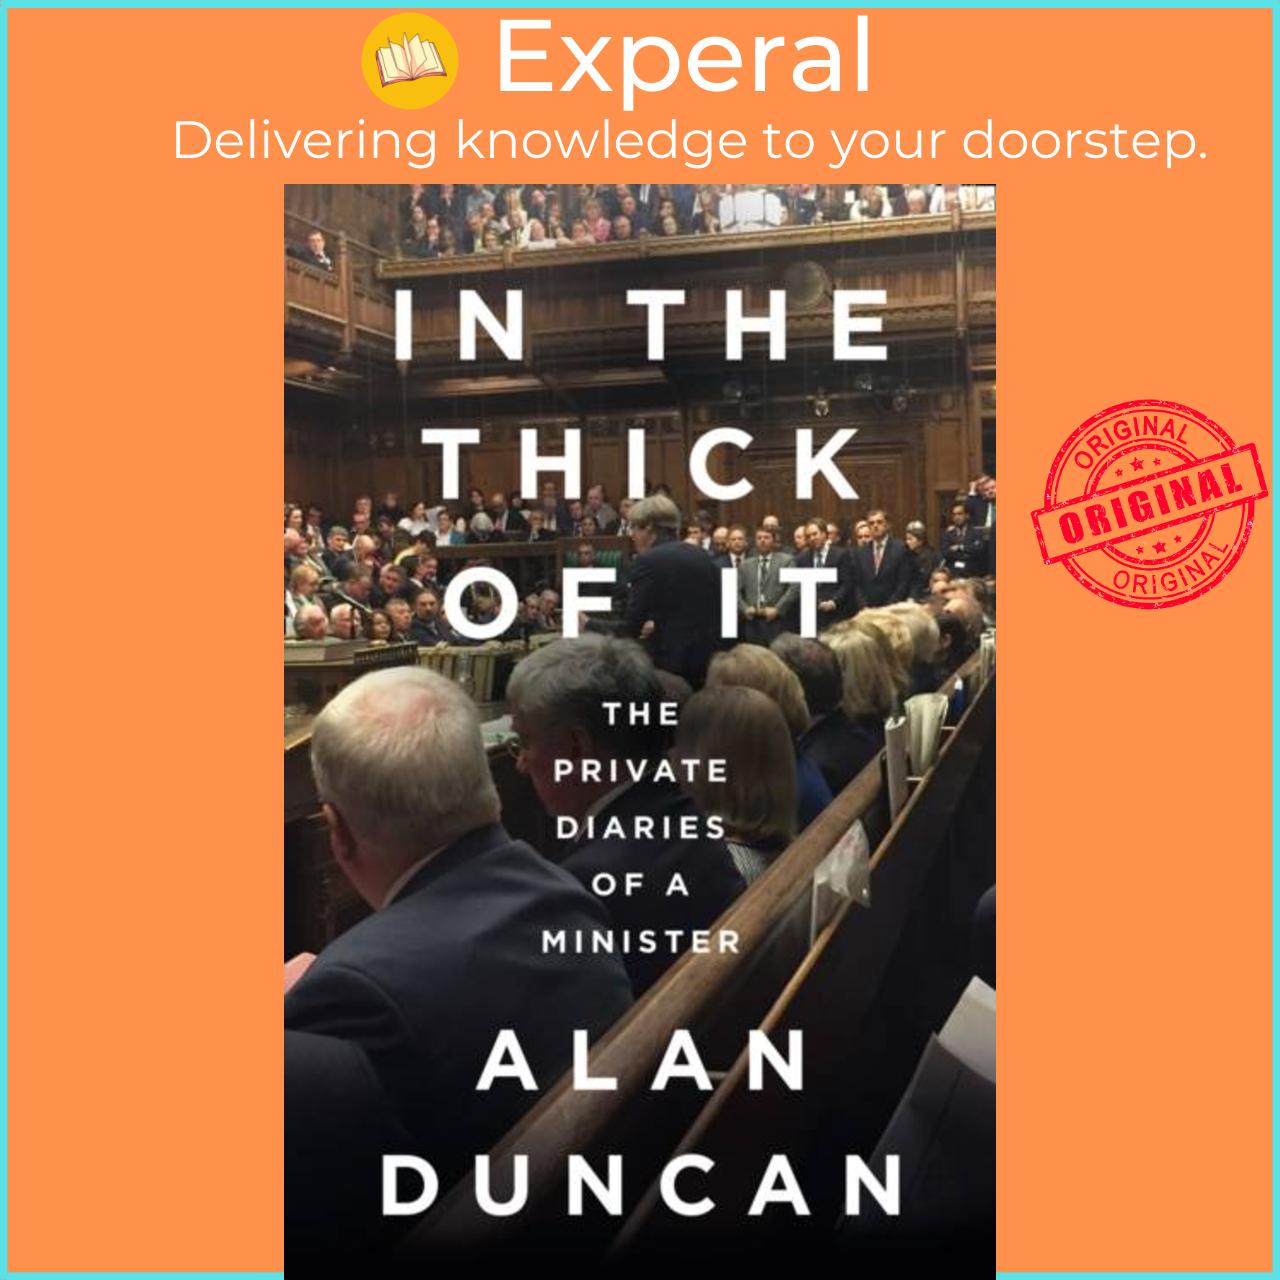 Sách - In the Thick of It - The Private Diaries of a Minister by Alan Duncan (UK edition, hardcover)